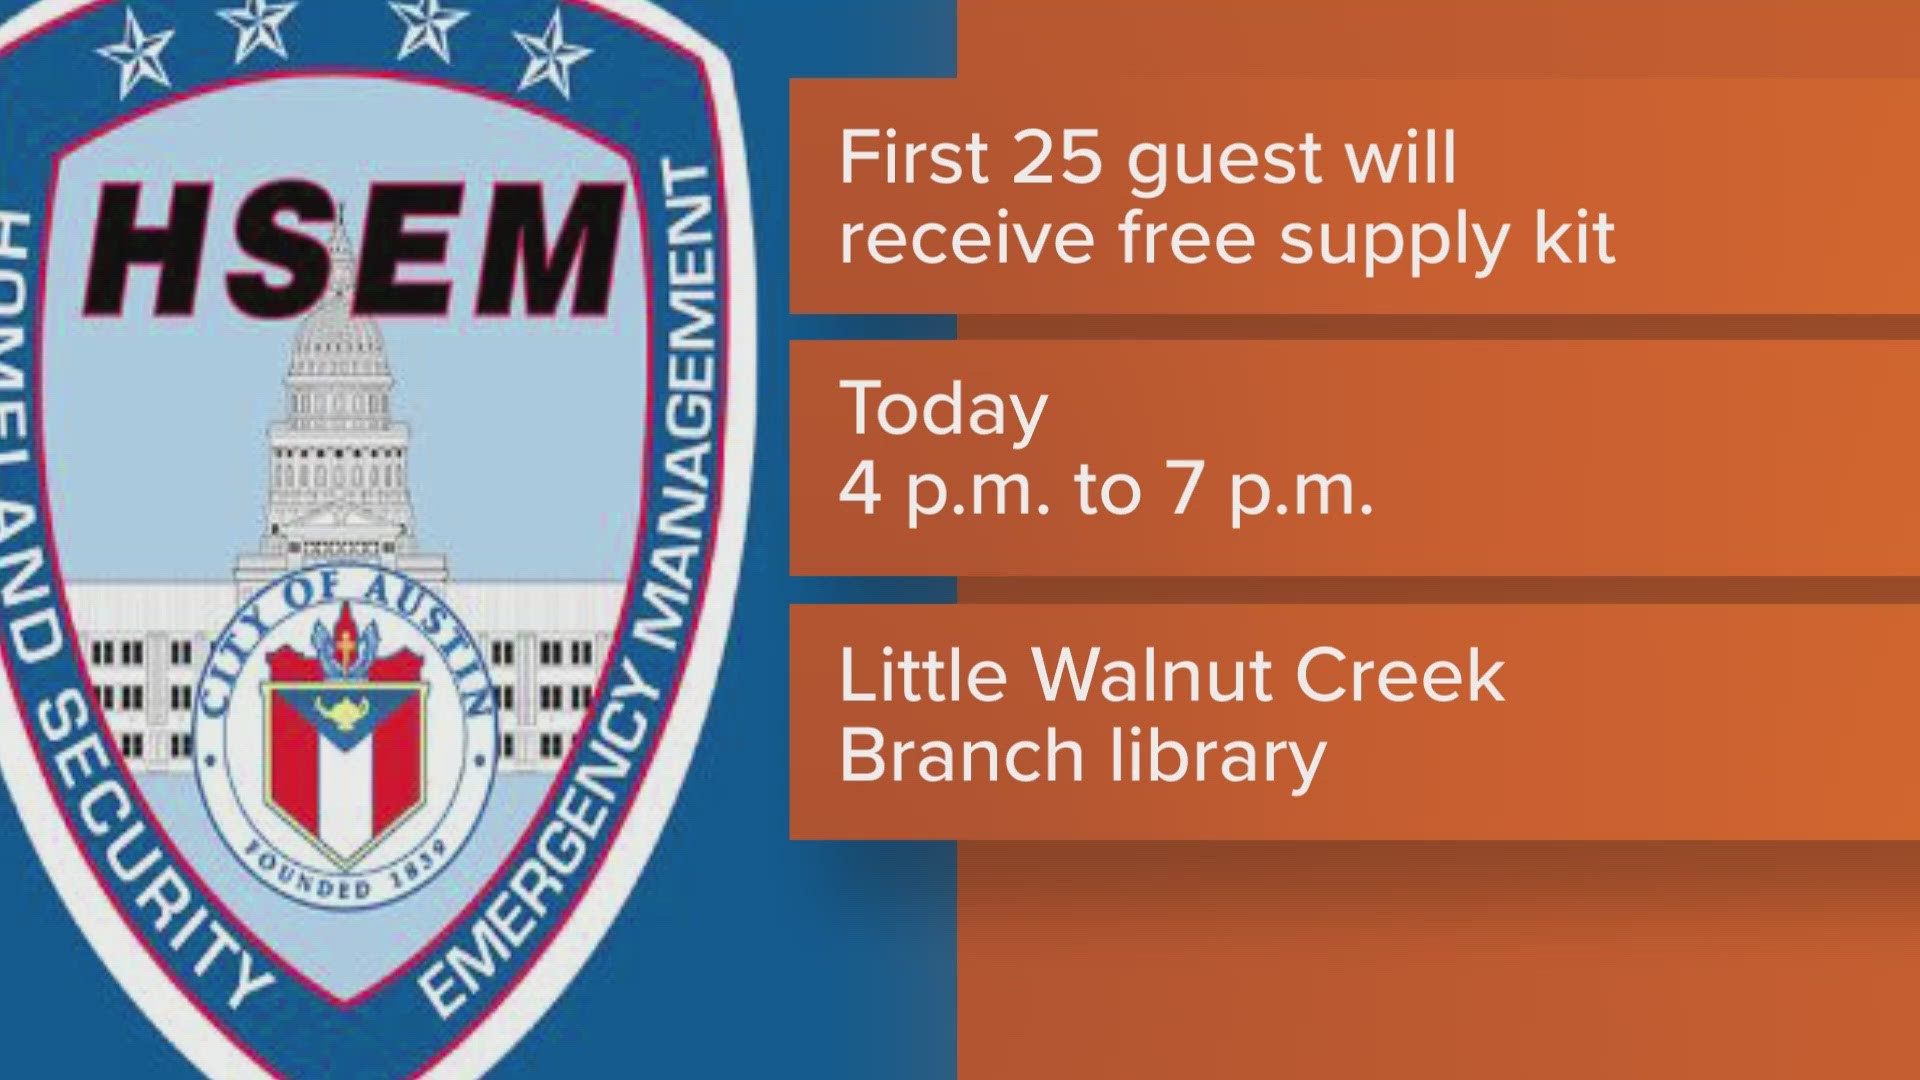 Attendees can learn how to prepare for severe weather from 4-9 p.m. Wednesday at the Little Walnut Creek Branch of the Austin Public Library.